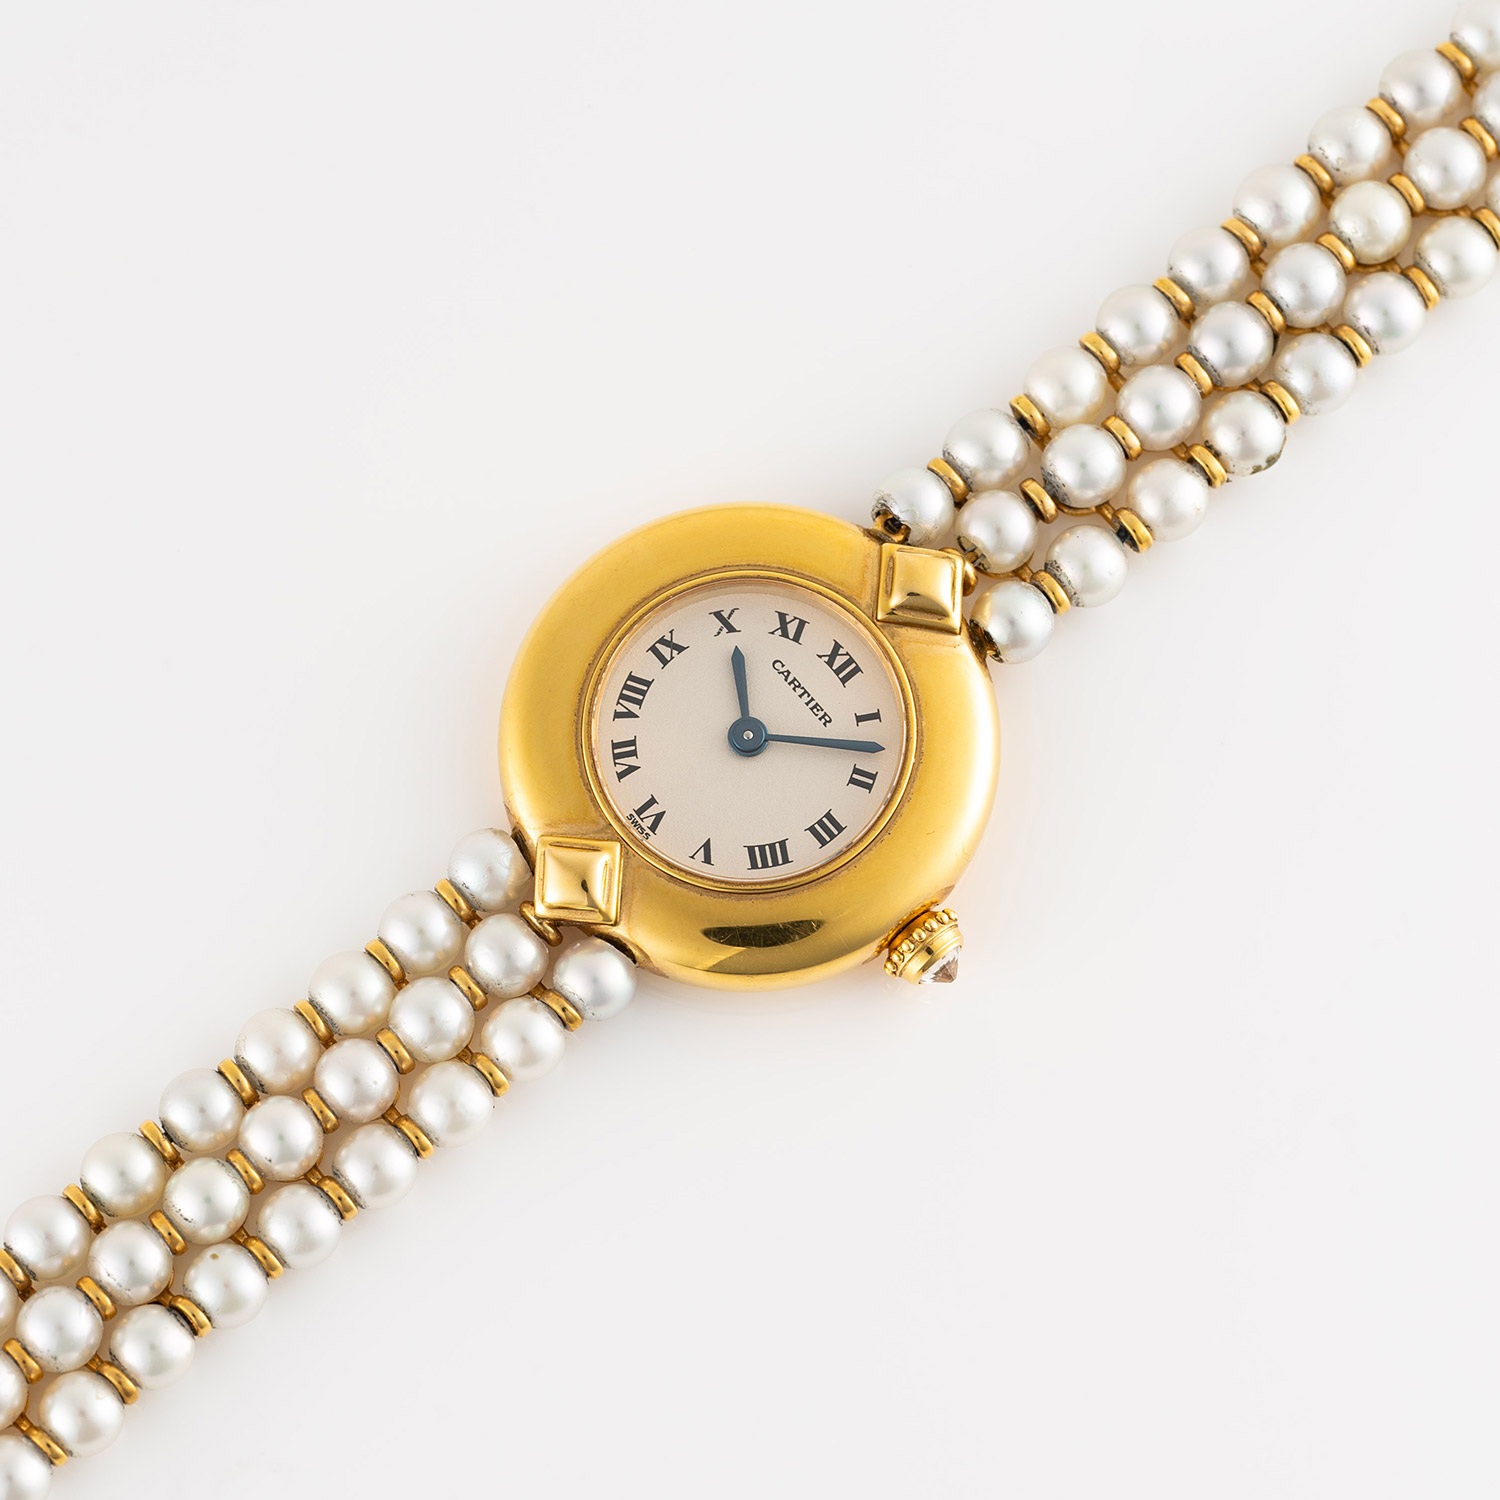 A LADY'S FINE 18K SOLID GOLD & PEARL CARTIER COLISEE BRACELET WATCH CIRCA 1990s, REF. 1989 1 - Image 3 of 9